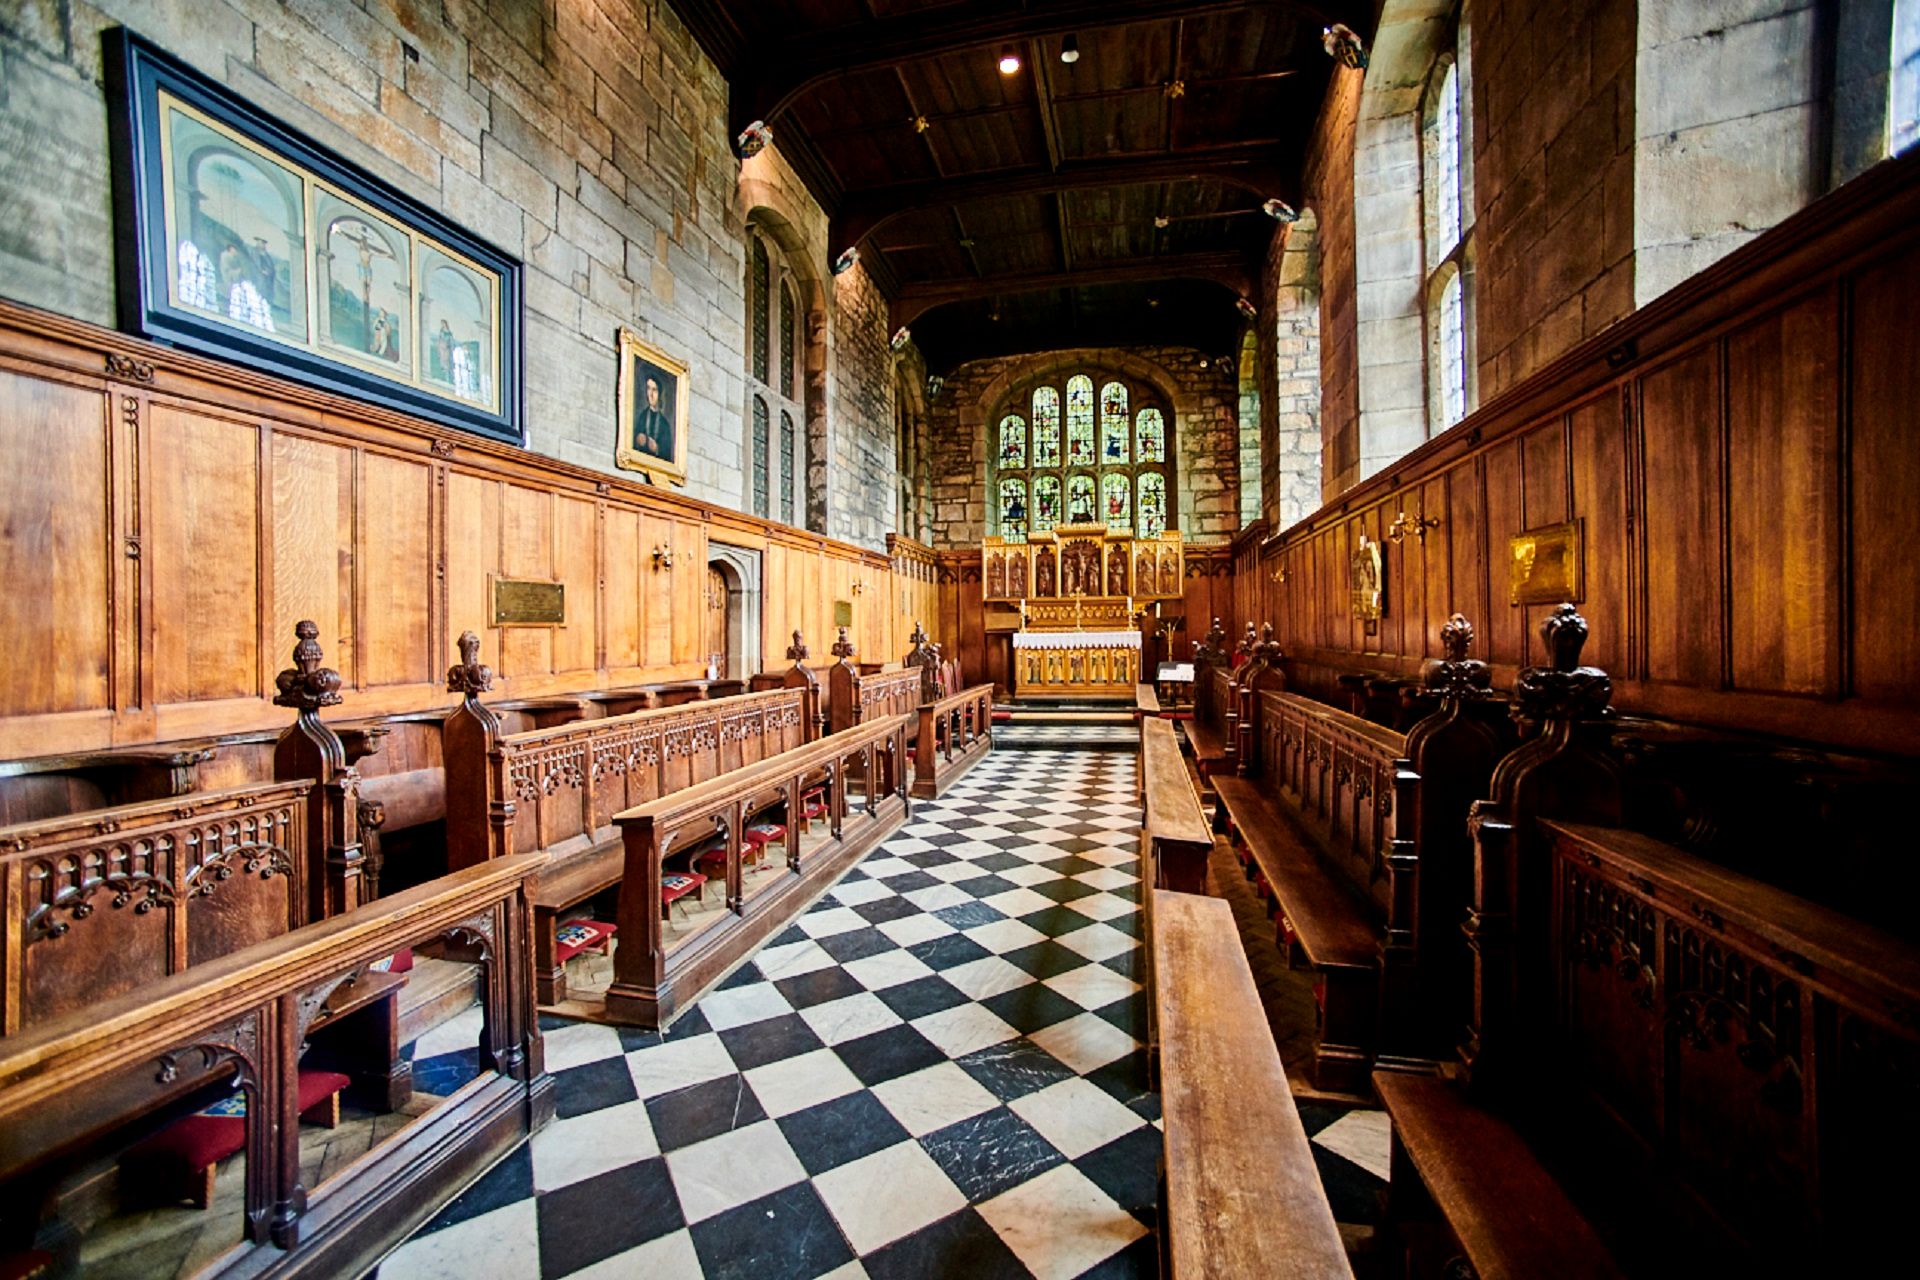 The Tunstall Chapel in Durham Castle. Looking east towards the stained-glass windows and altar.